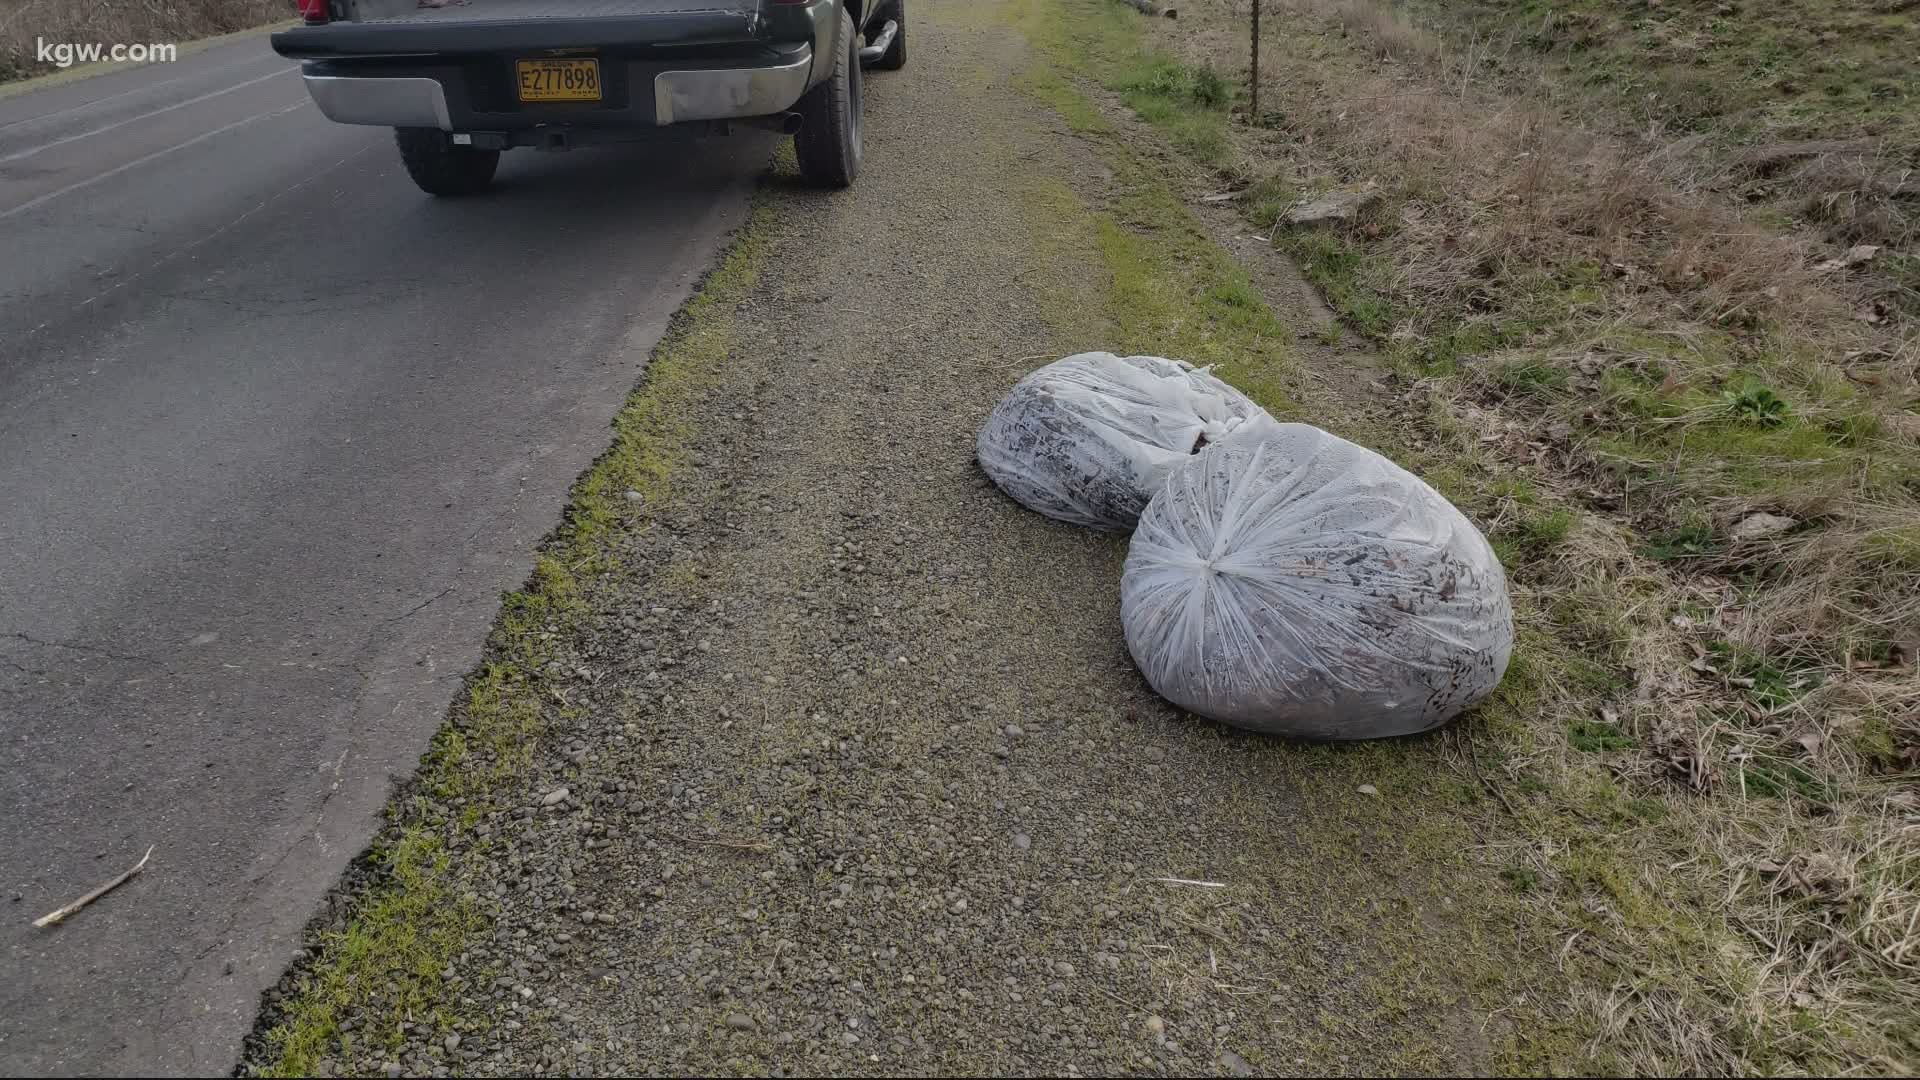 It’s a disgusting and dangerous situation in east Multnomah County, where someone is illegally dumping human feces along rural roads.